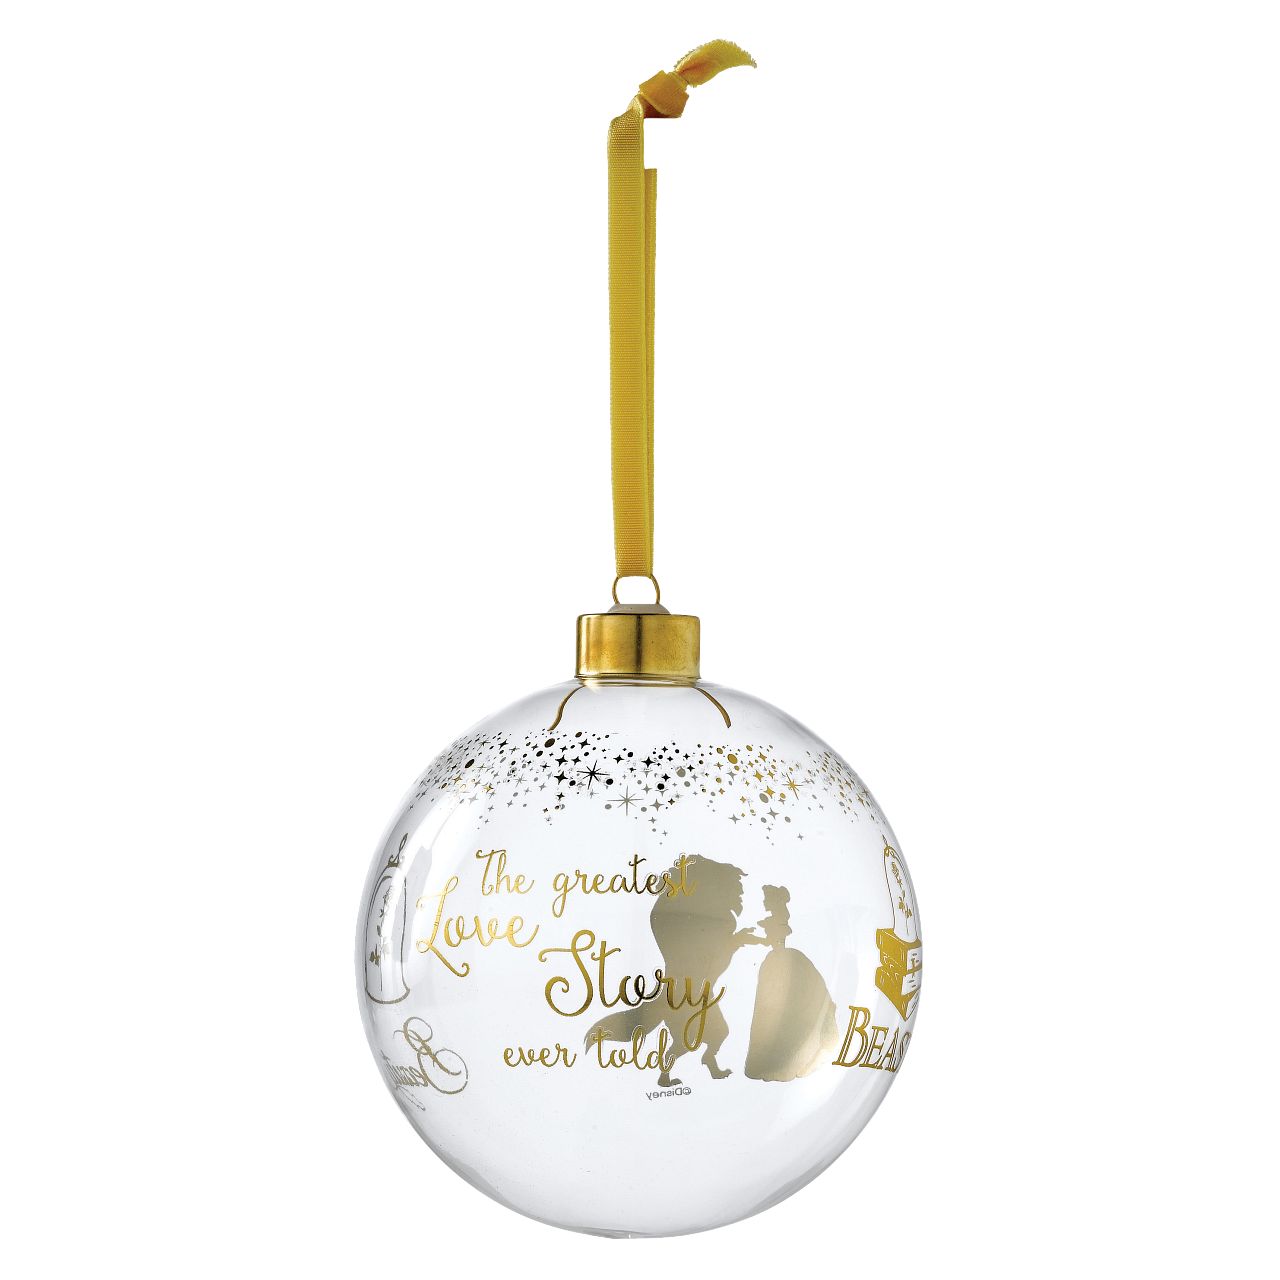 Belle Wedding Bauble  This glass Beauty and the Beast bauble is the perfect gift to remind the happy couple of their love story. The bauble is strung with gold ribbon and is presented in a Disney branded gift box. Not a toy or children's product. Intended for adults only.